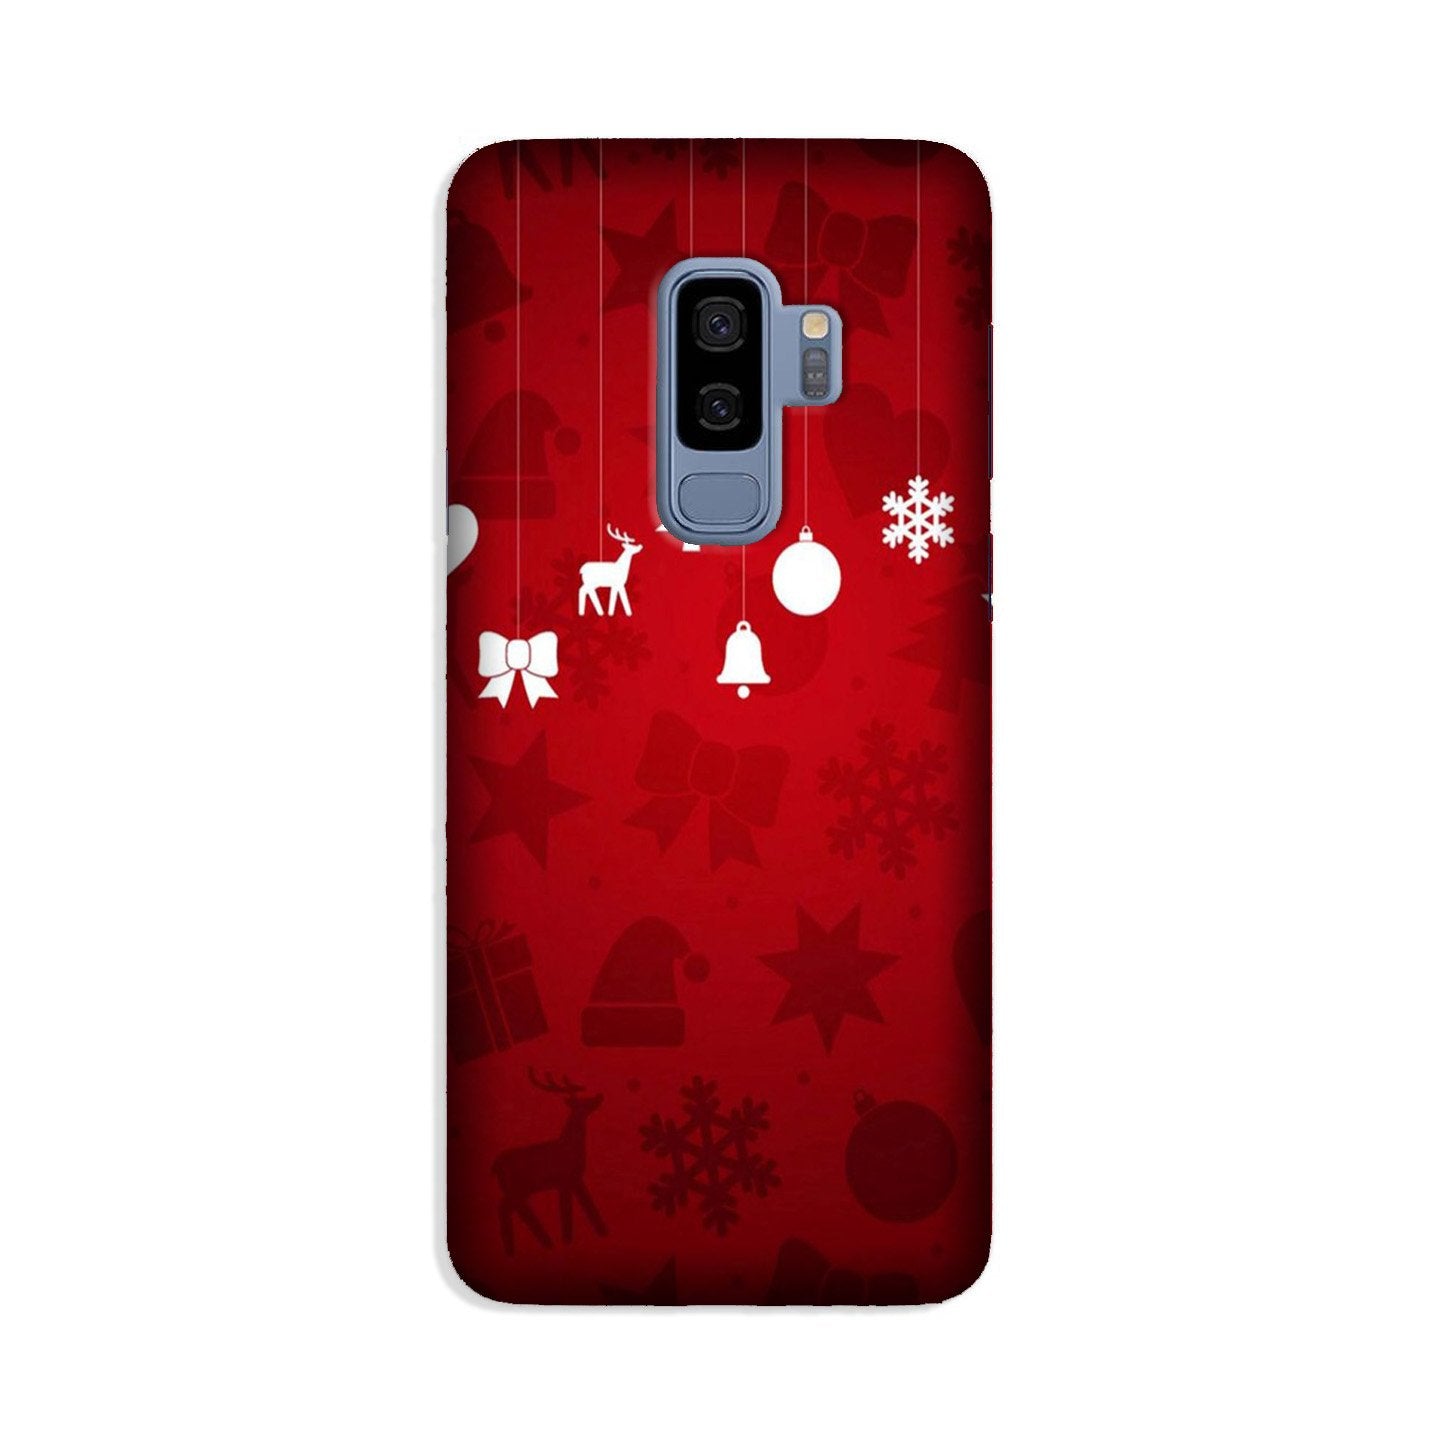 Christmas Case for Galaxy S9 Plus